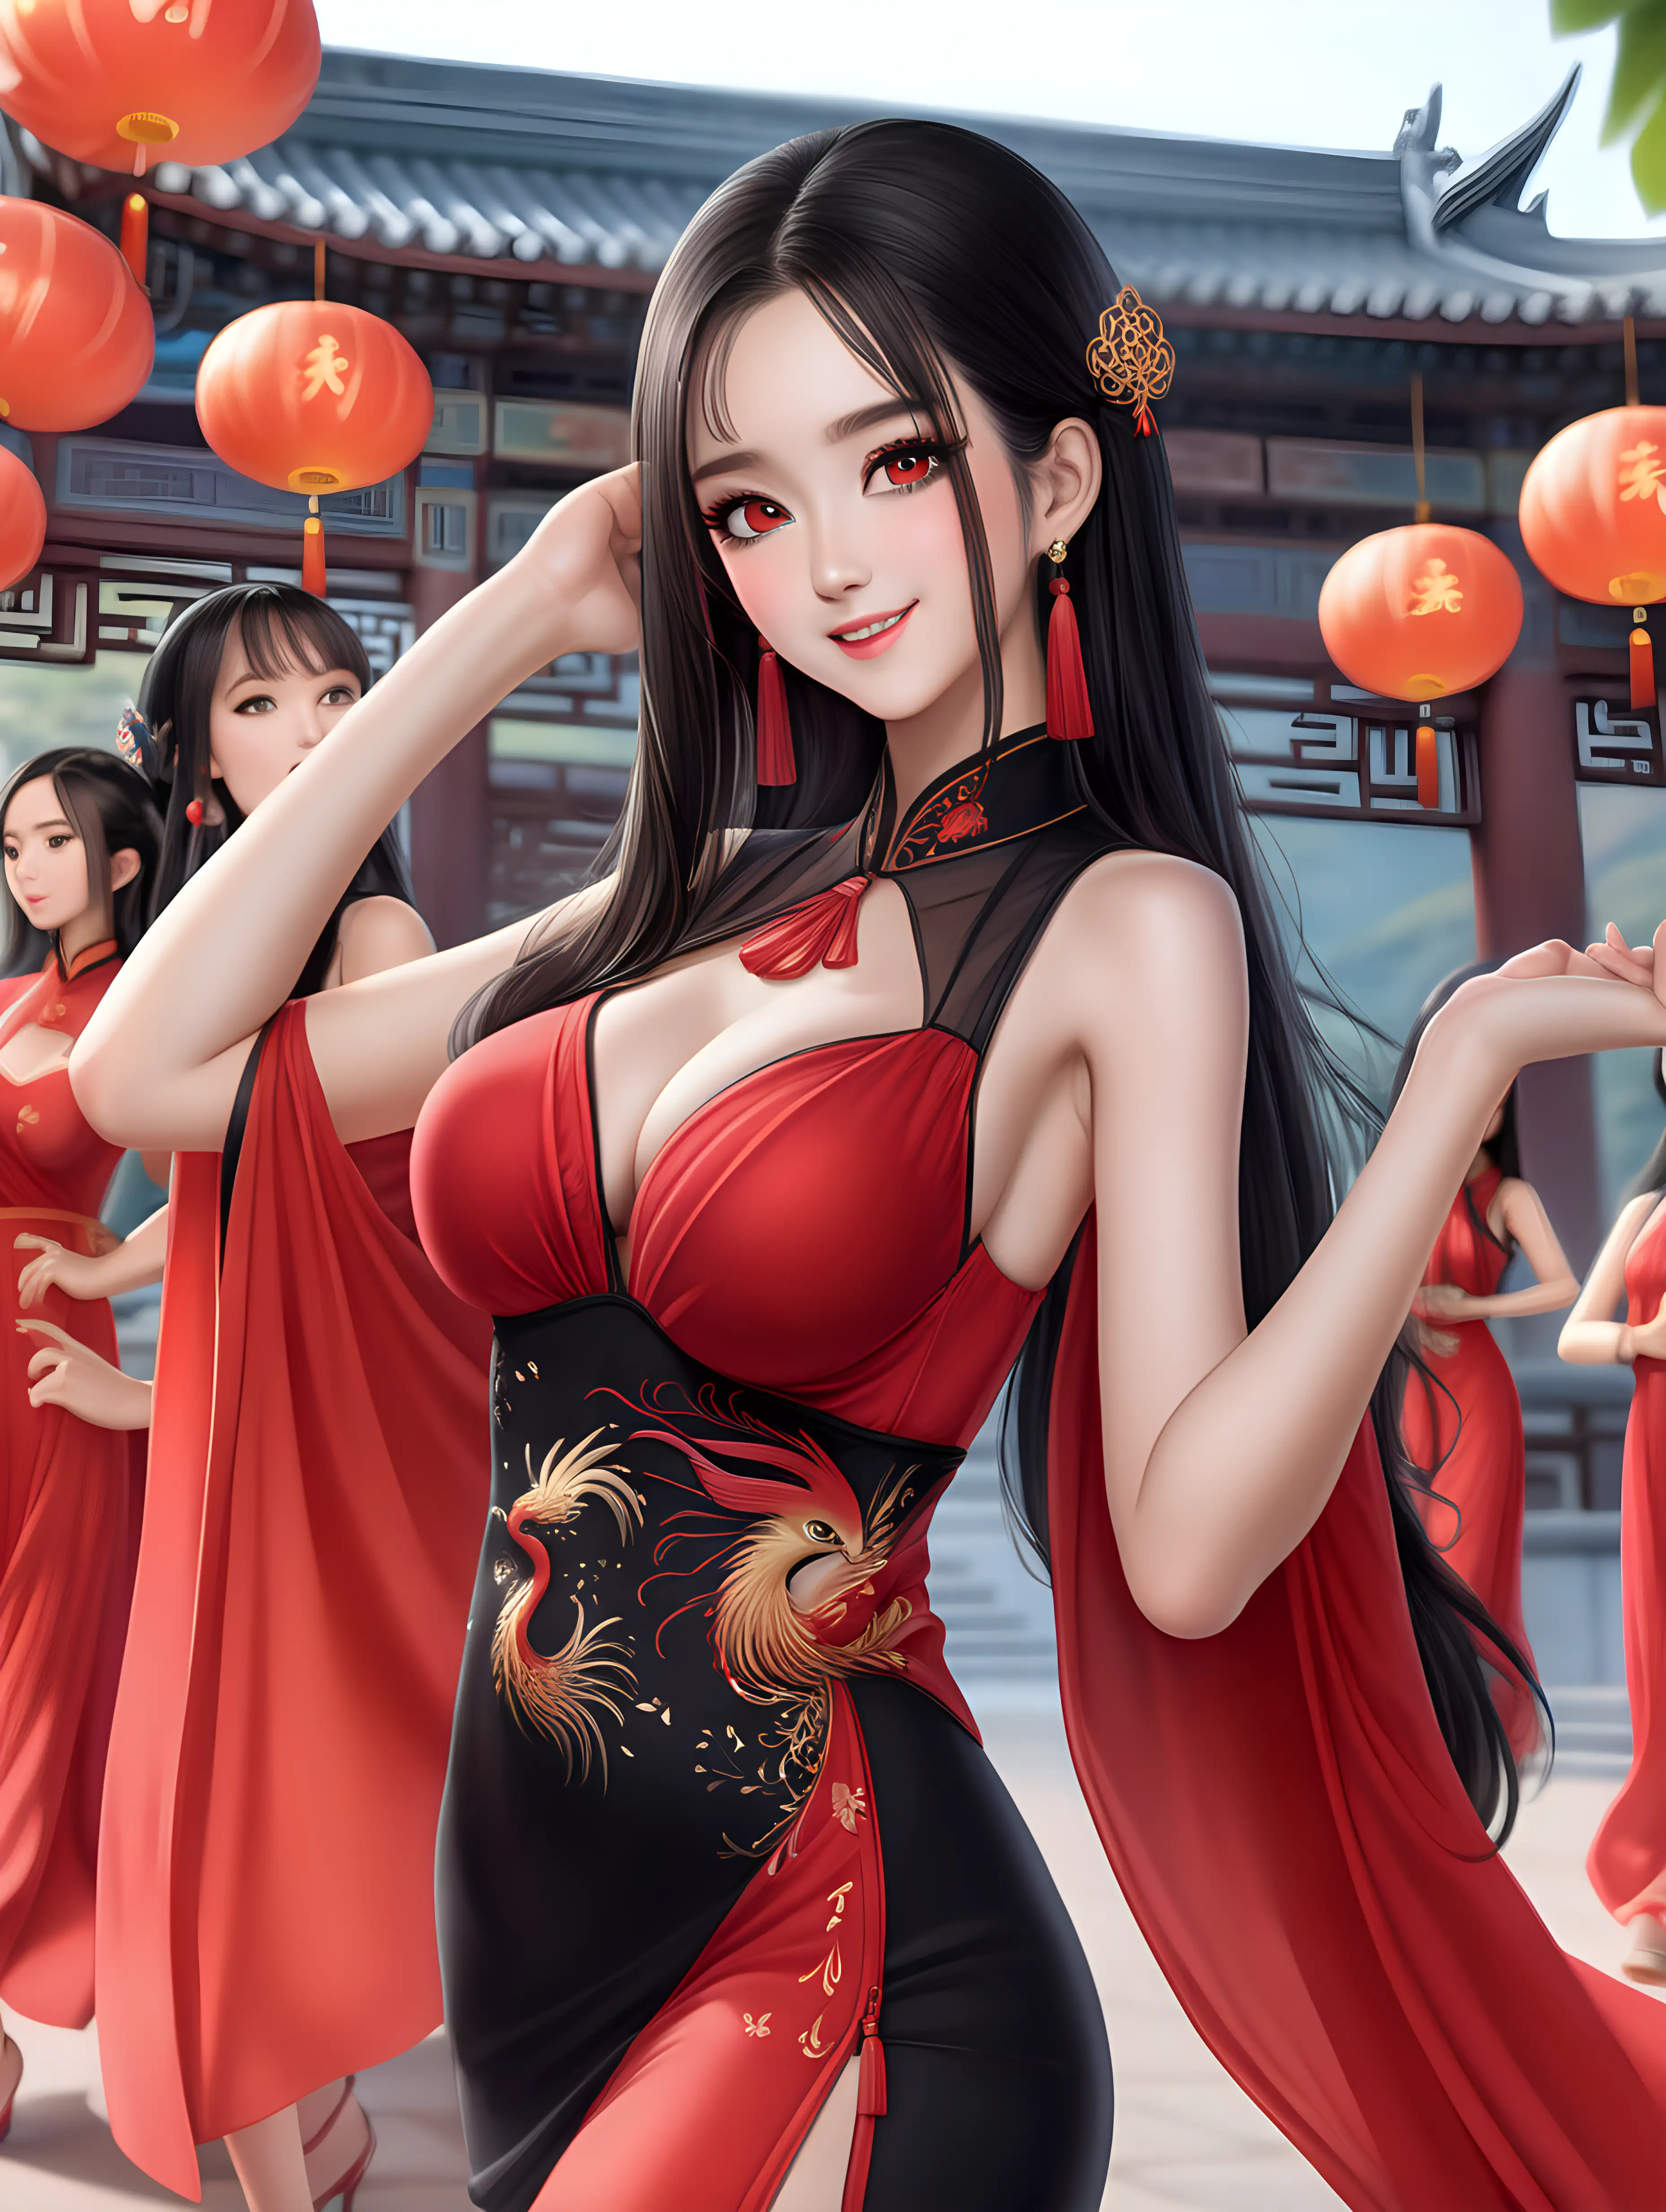 Elegant Wang Ou Inspires with a Modern Dance in Stunning Red Dress